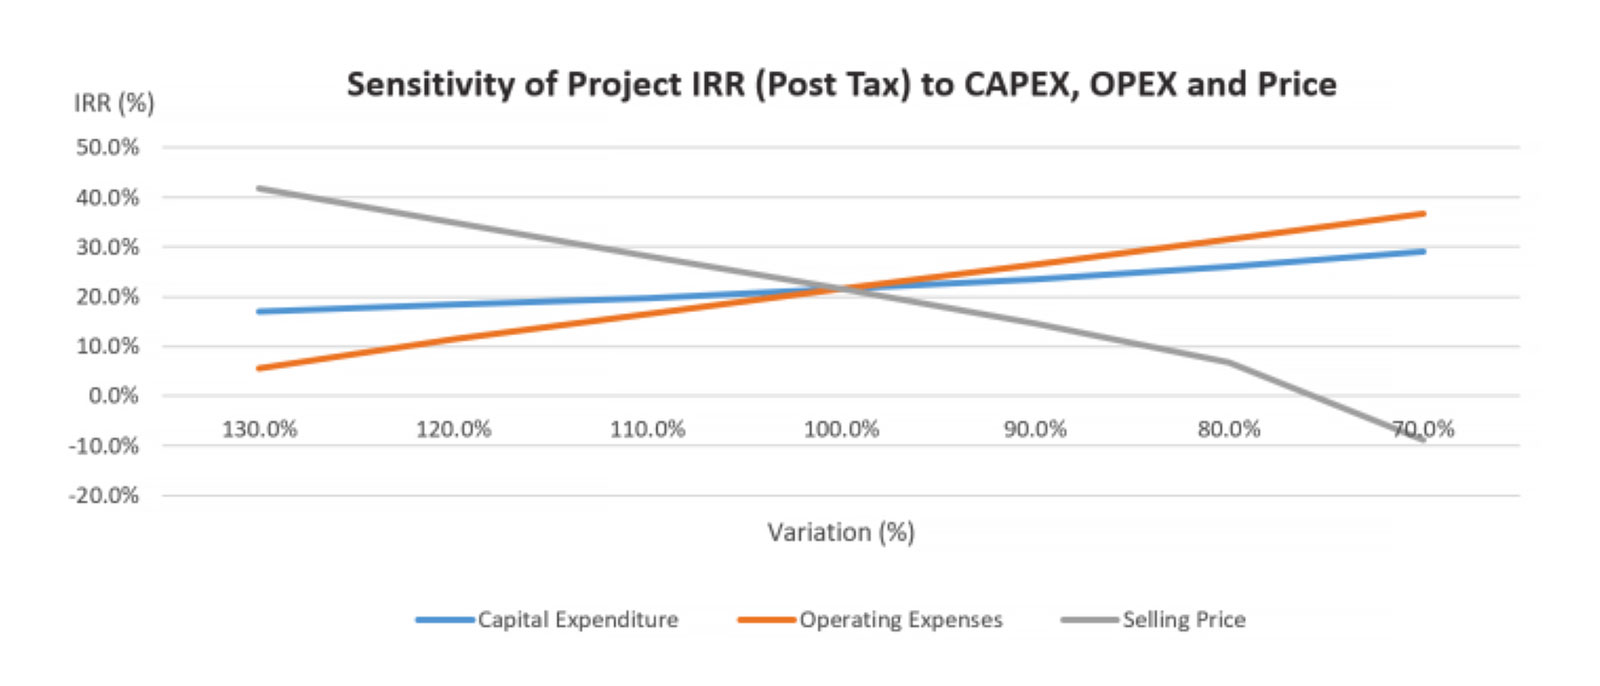 Sensitivity of Project IRR (Post-tax) to CAPEX, OPEX and Price